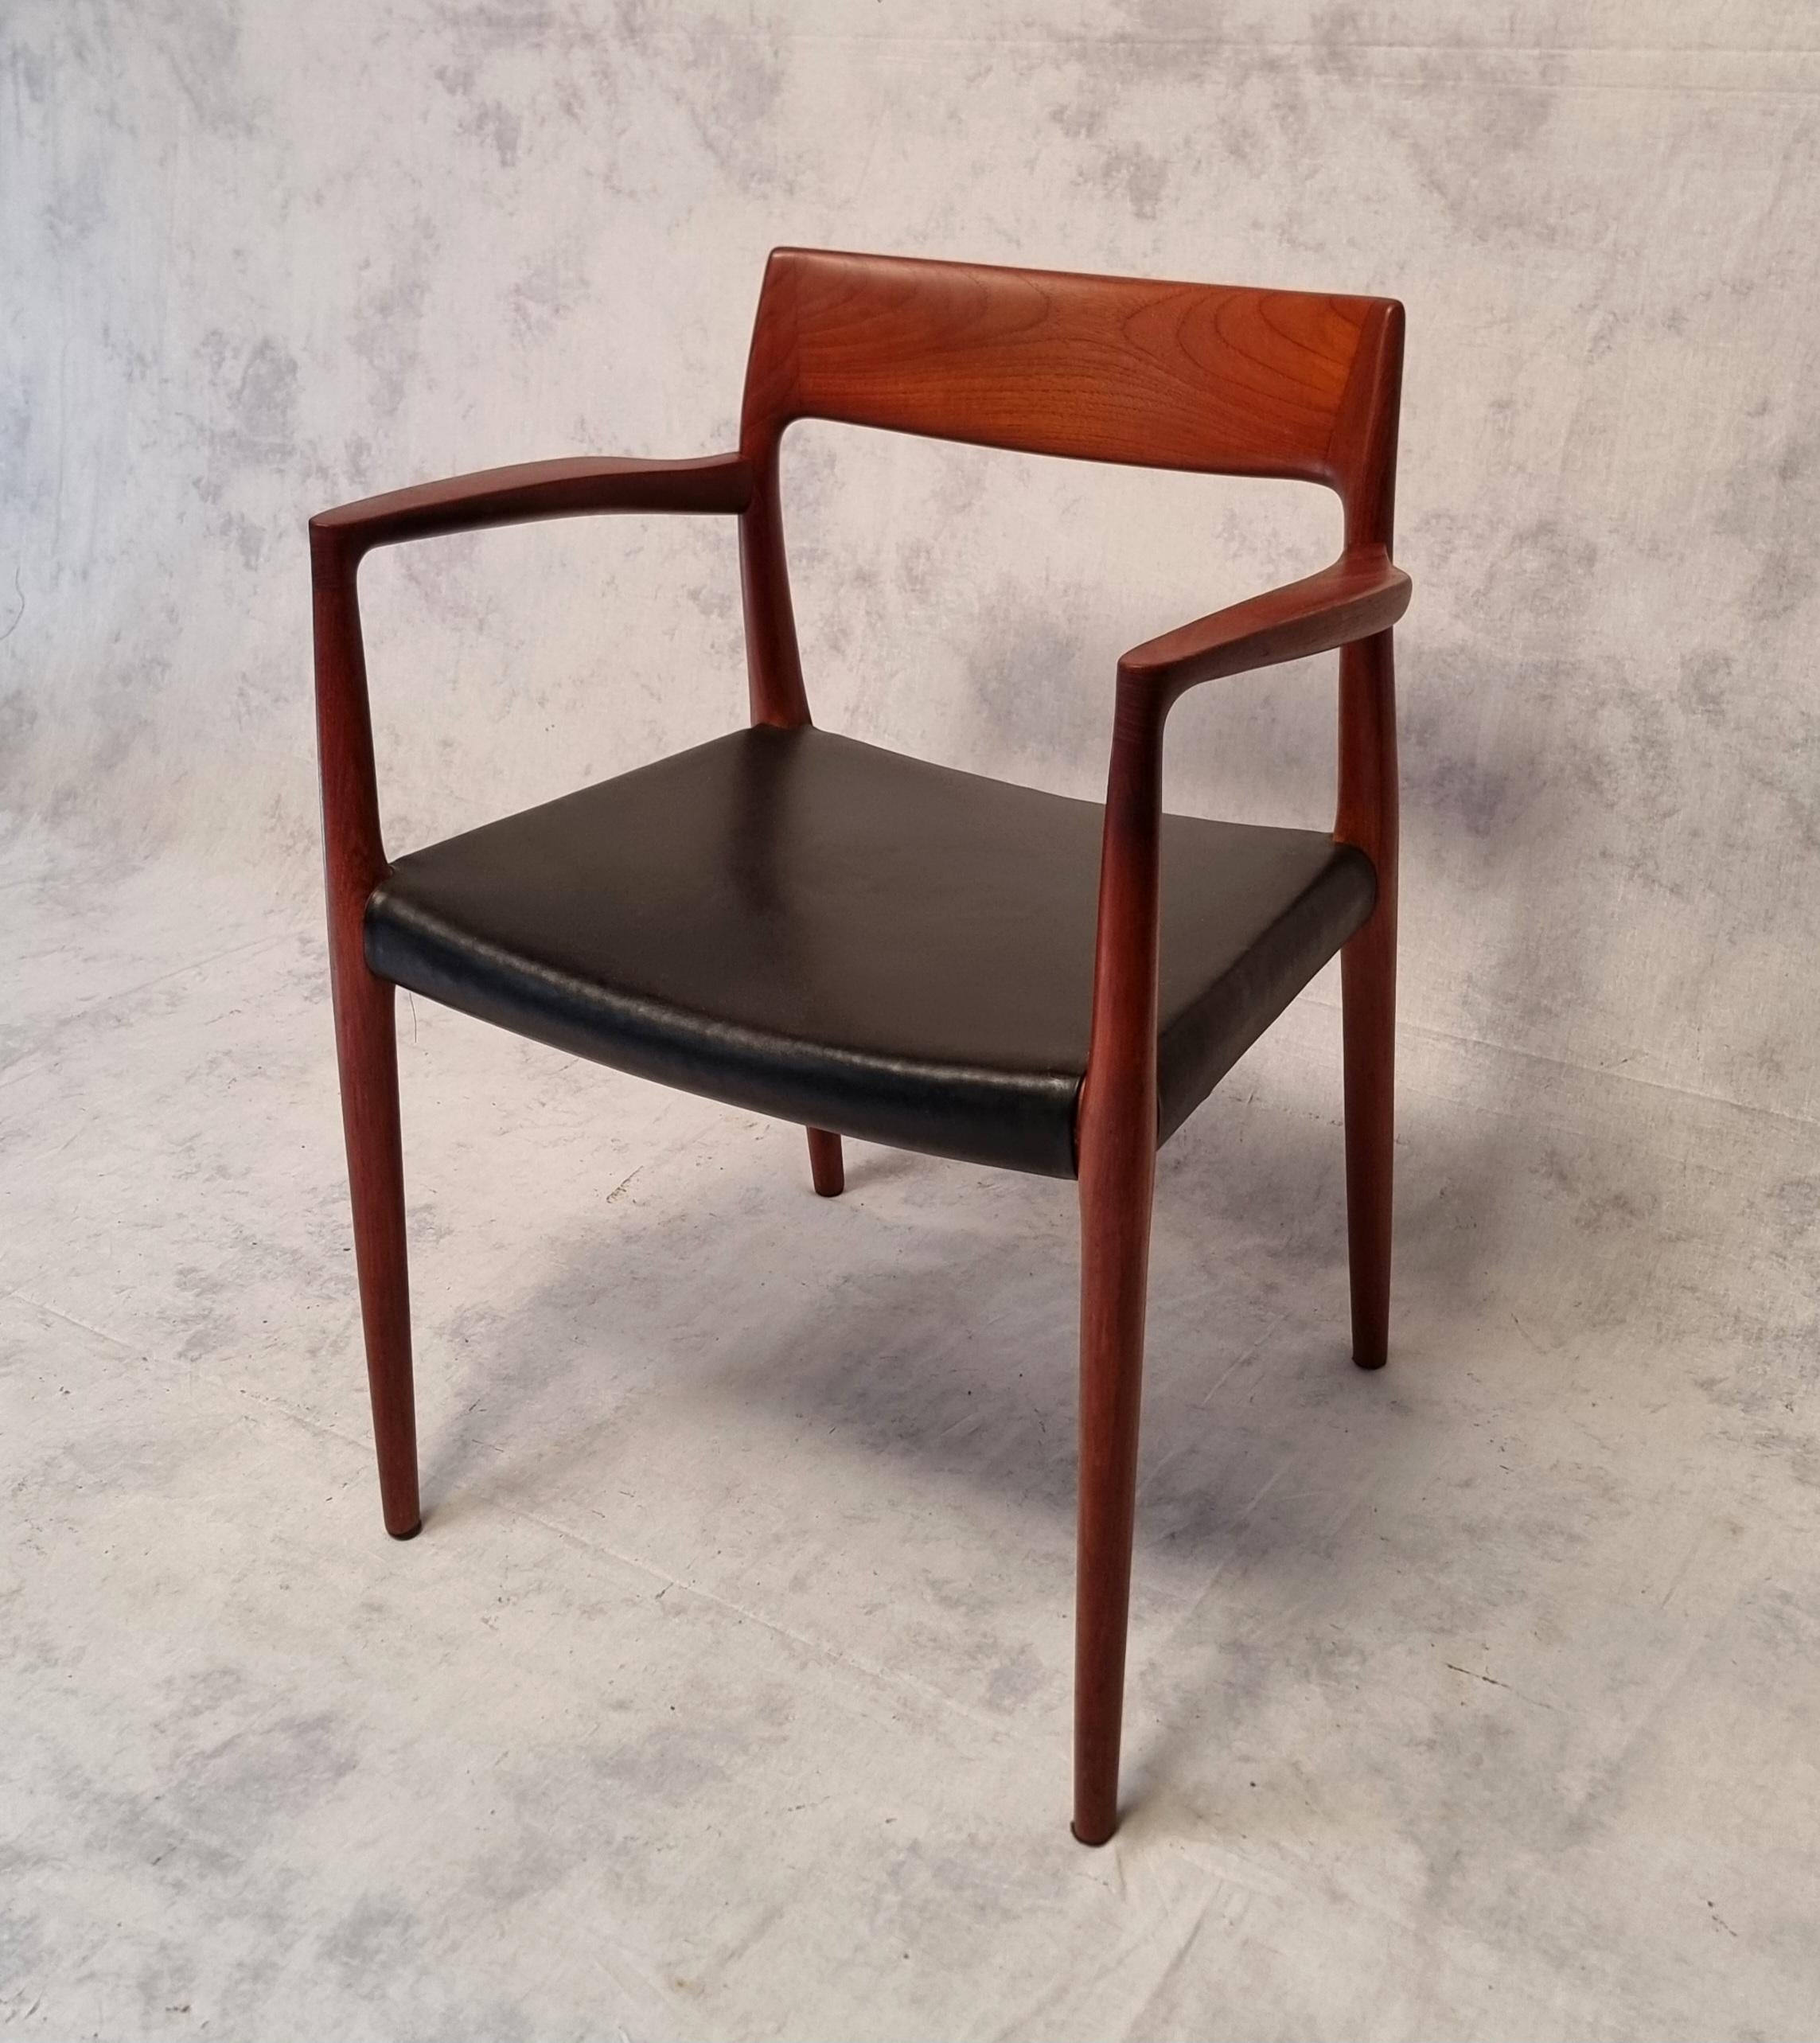 Superb office chair from the well-known Danish designer Niels Otto Moller. Niels Otto Moller is known in particular for his work on seats. He has developed a series of seats with elegant and dynamic designs which have become references in the world